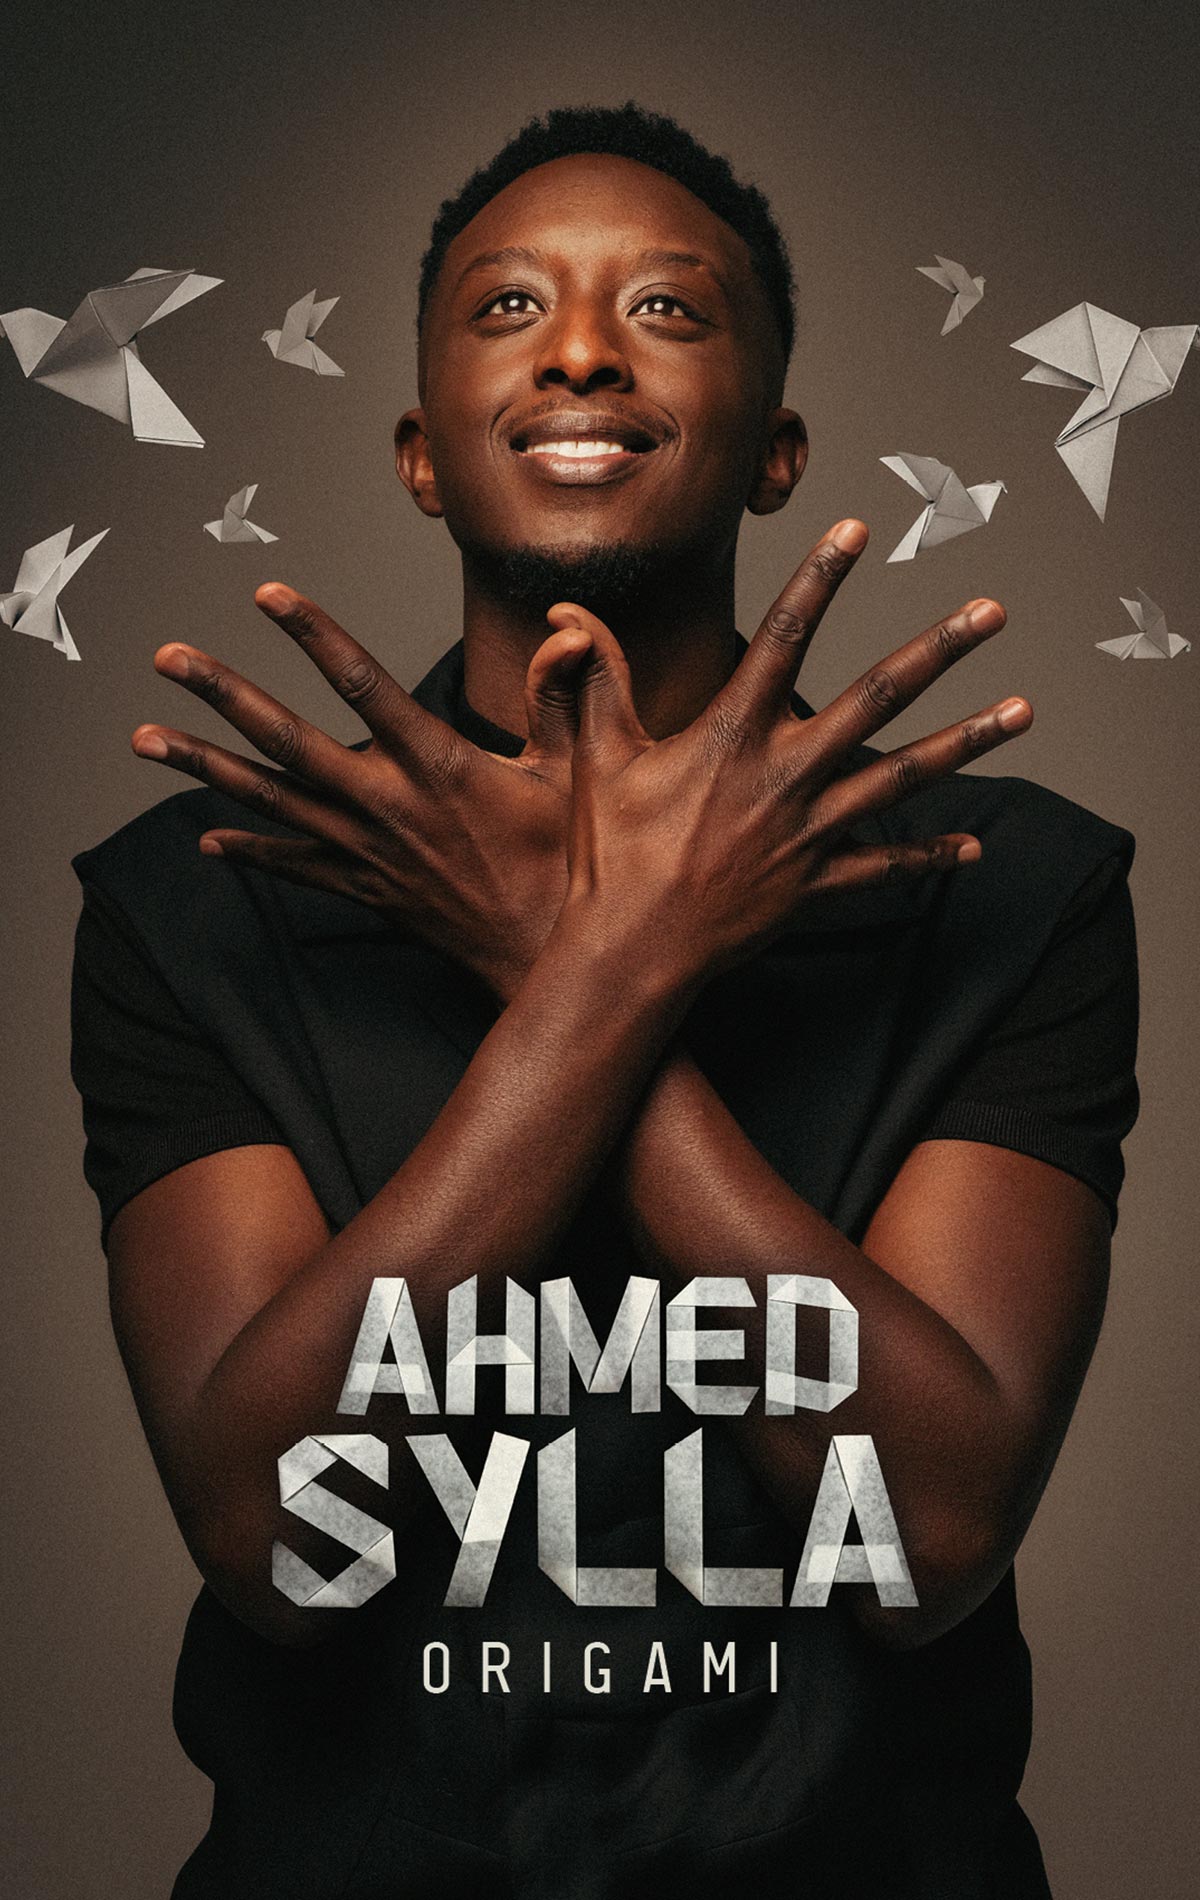 Ahmed Sylla at Opera de Limoges Tickets